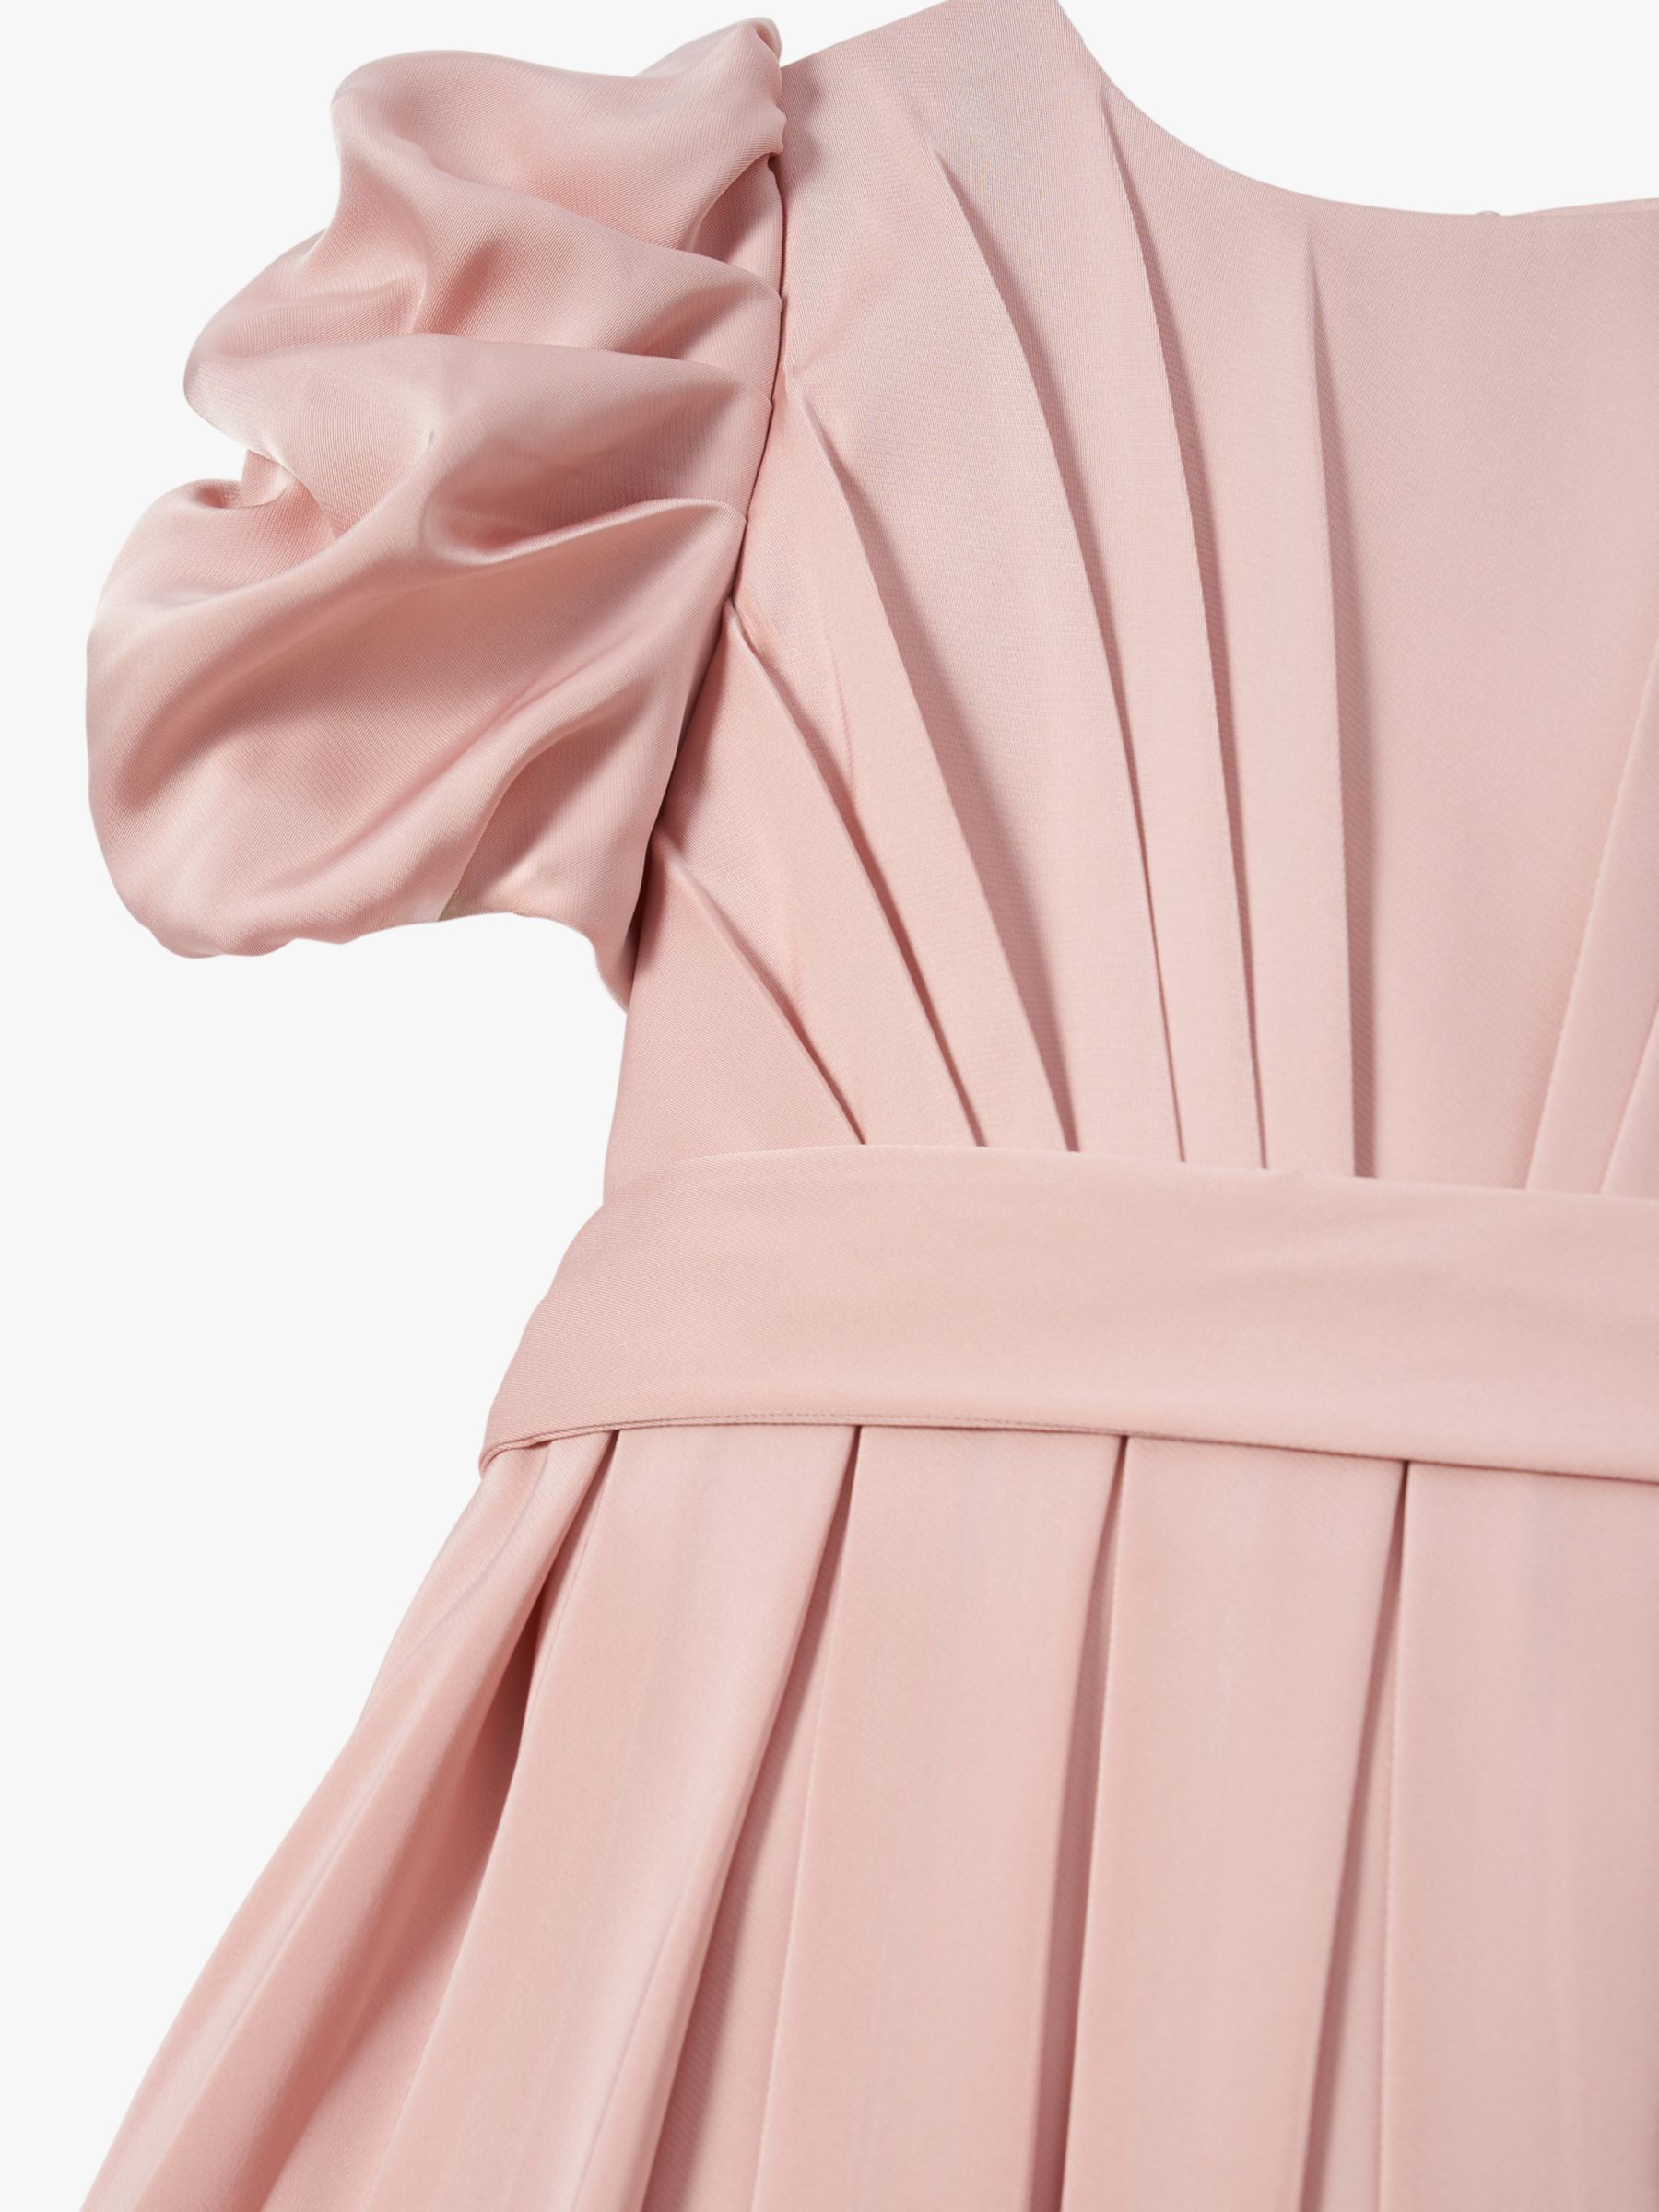 Buy Angel & Rocket Kids' Portia Pleated Bodice Puff Sleeve Occasion Dress, Blush Online at johnlewis.com